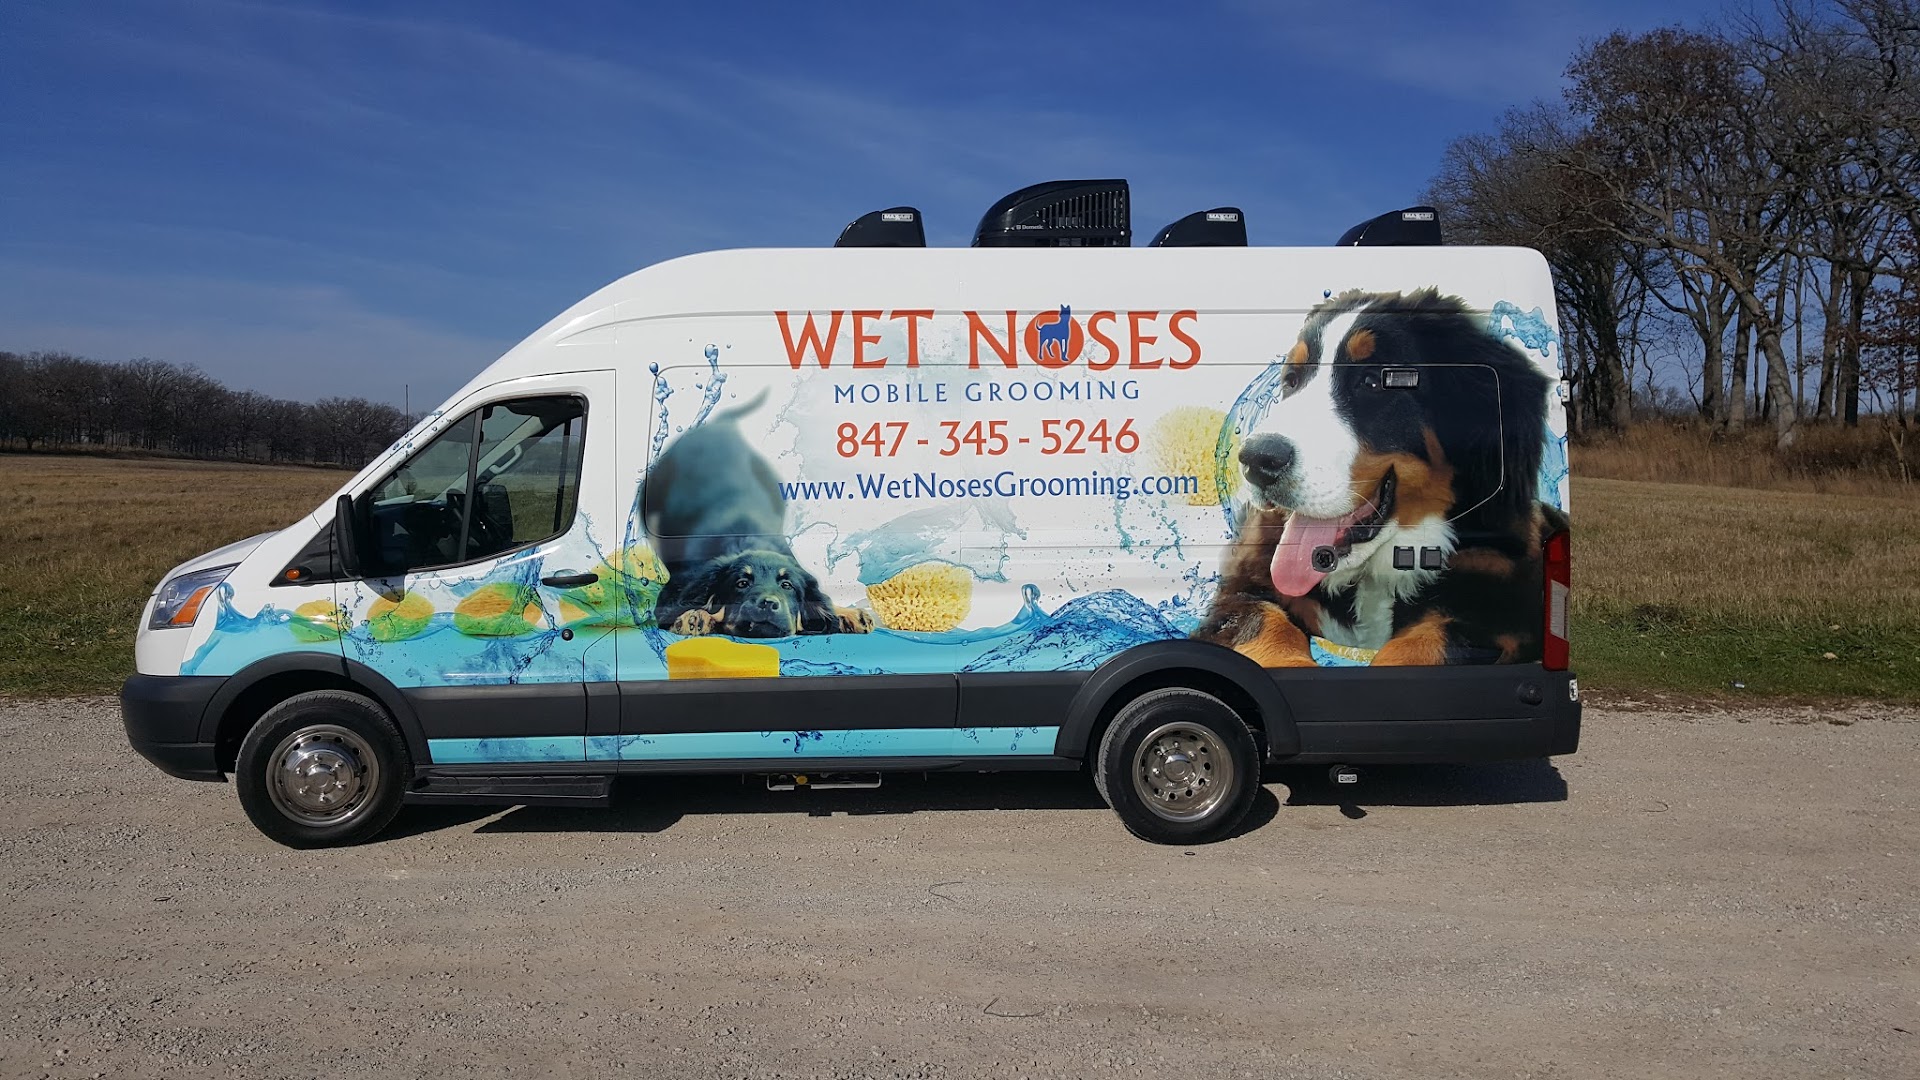 Wet Noses Mobile Grooming